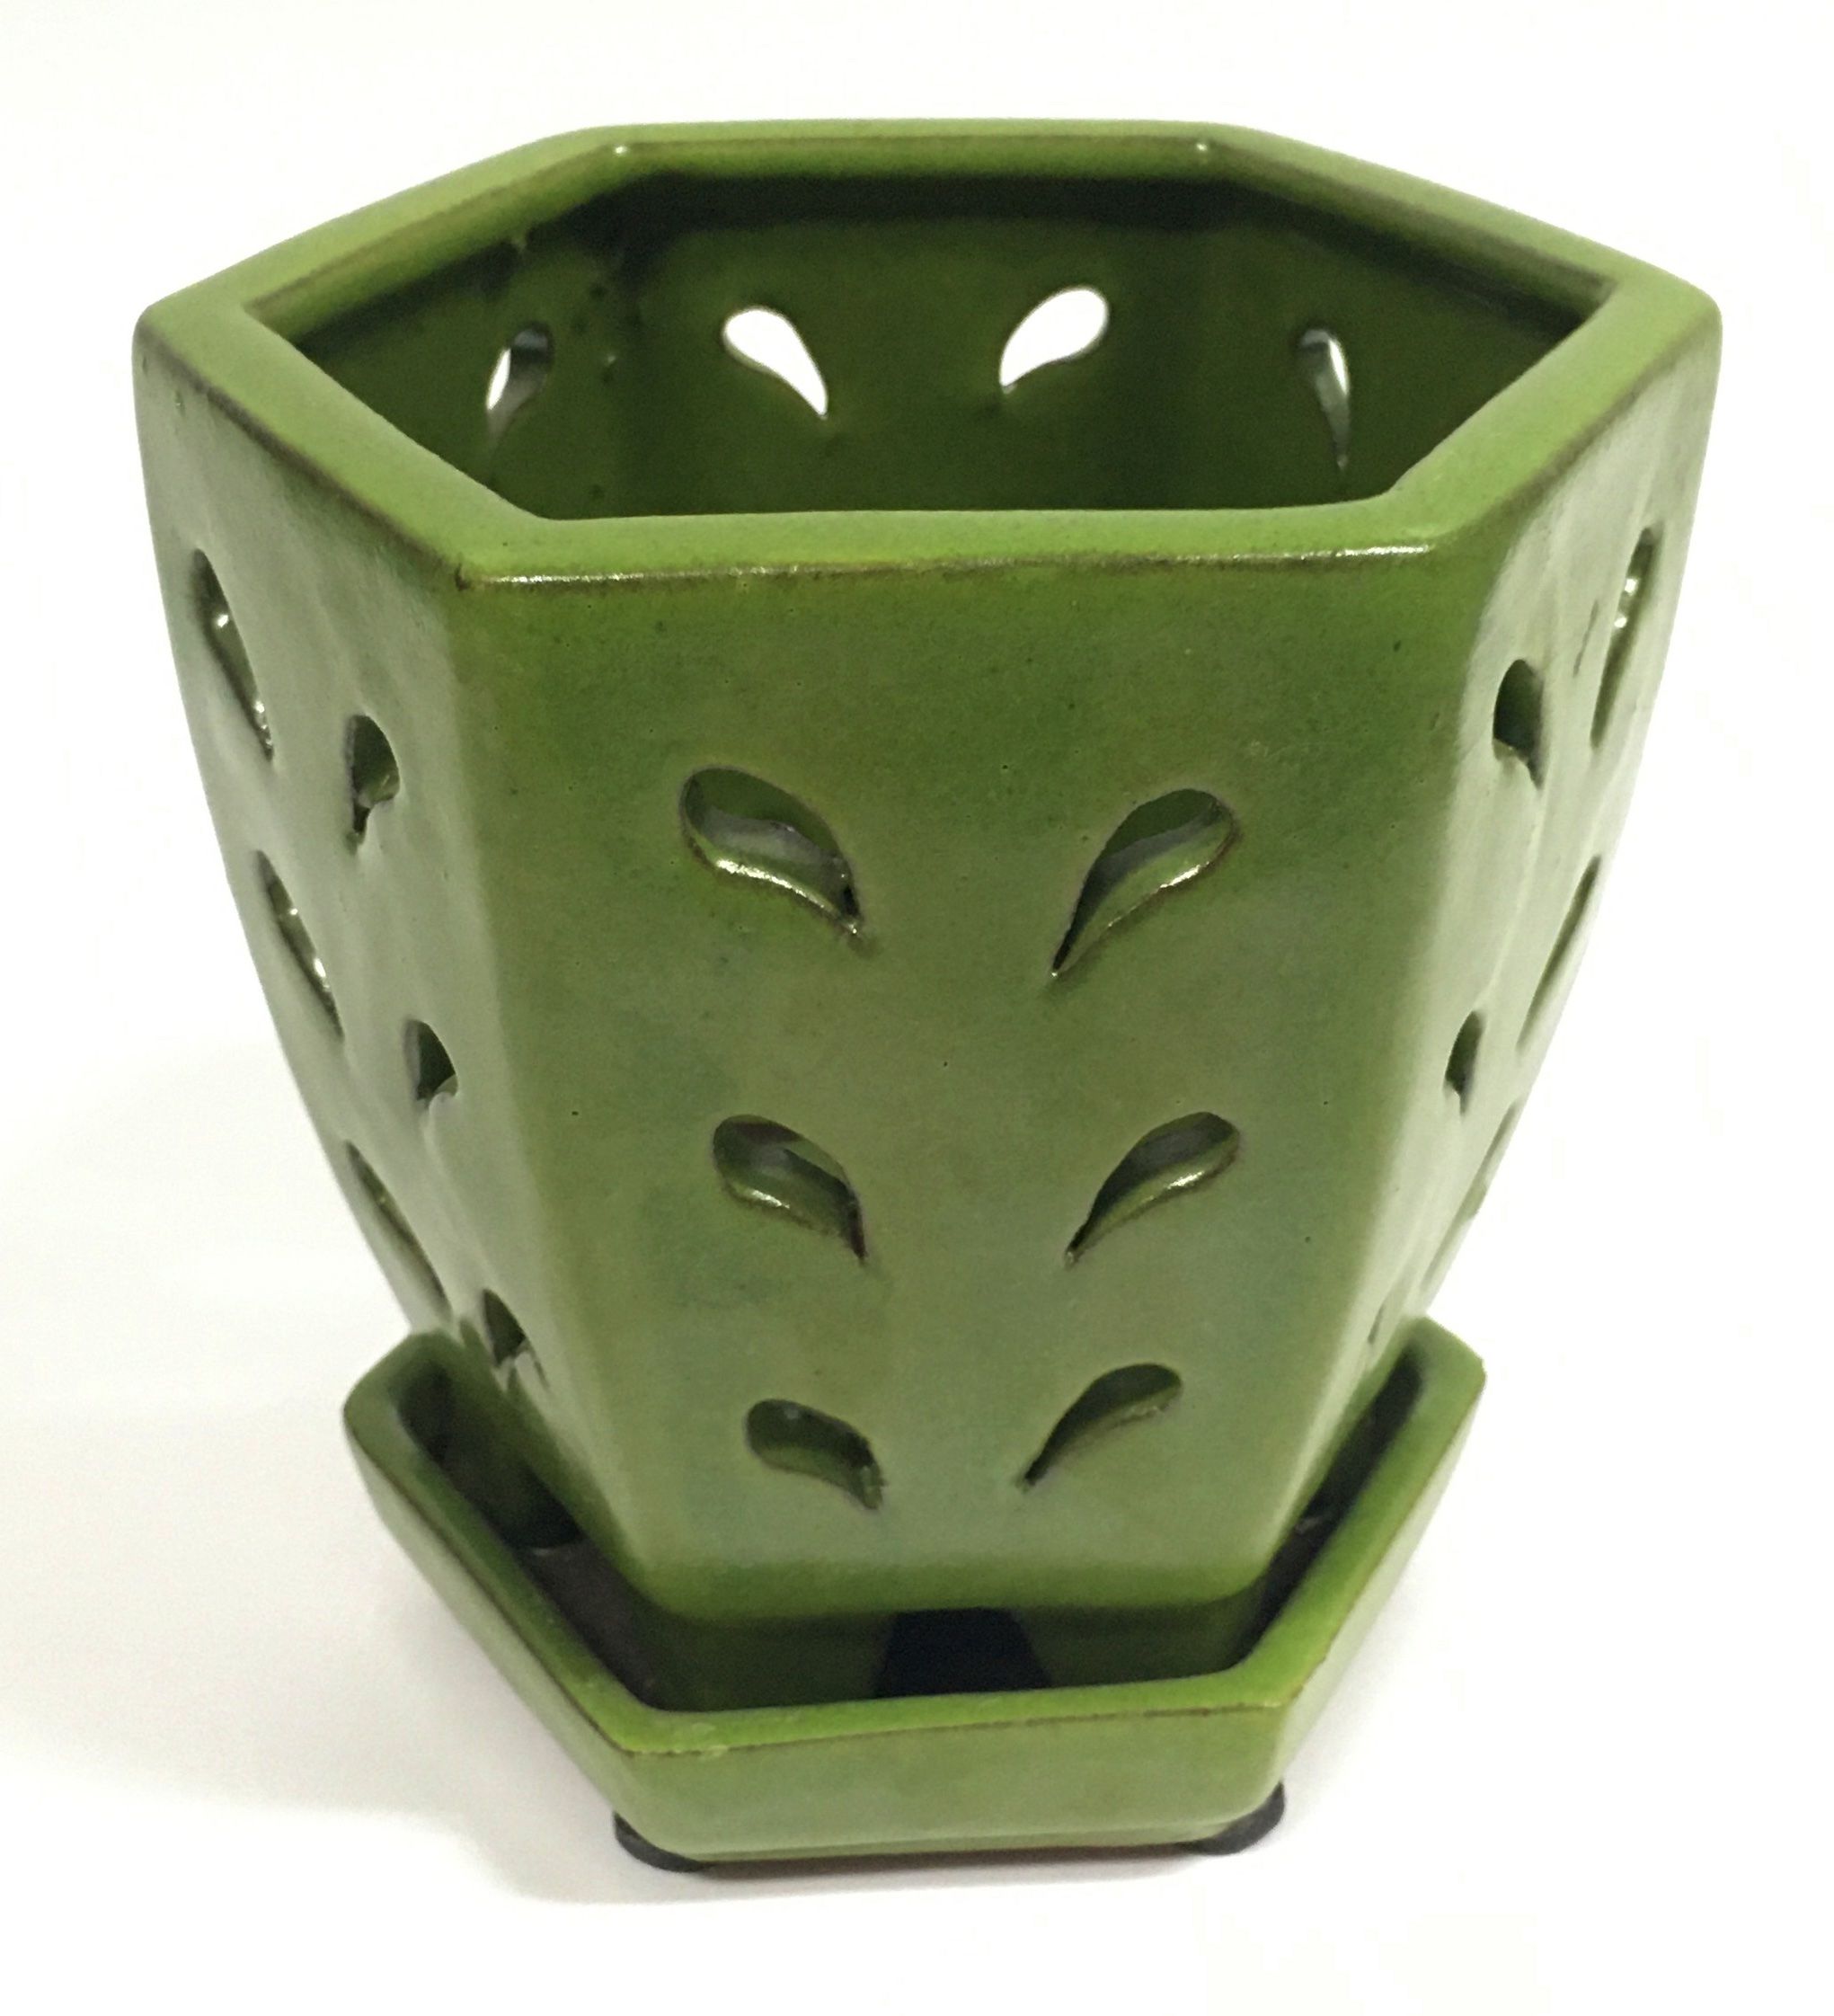 Cute vintage MCM green planter could fill with fake succulents!